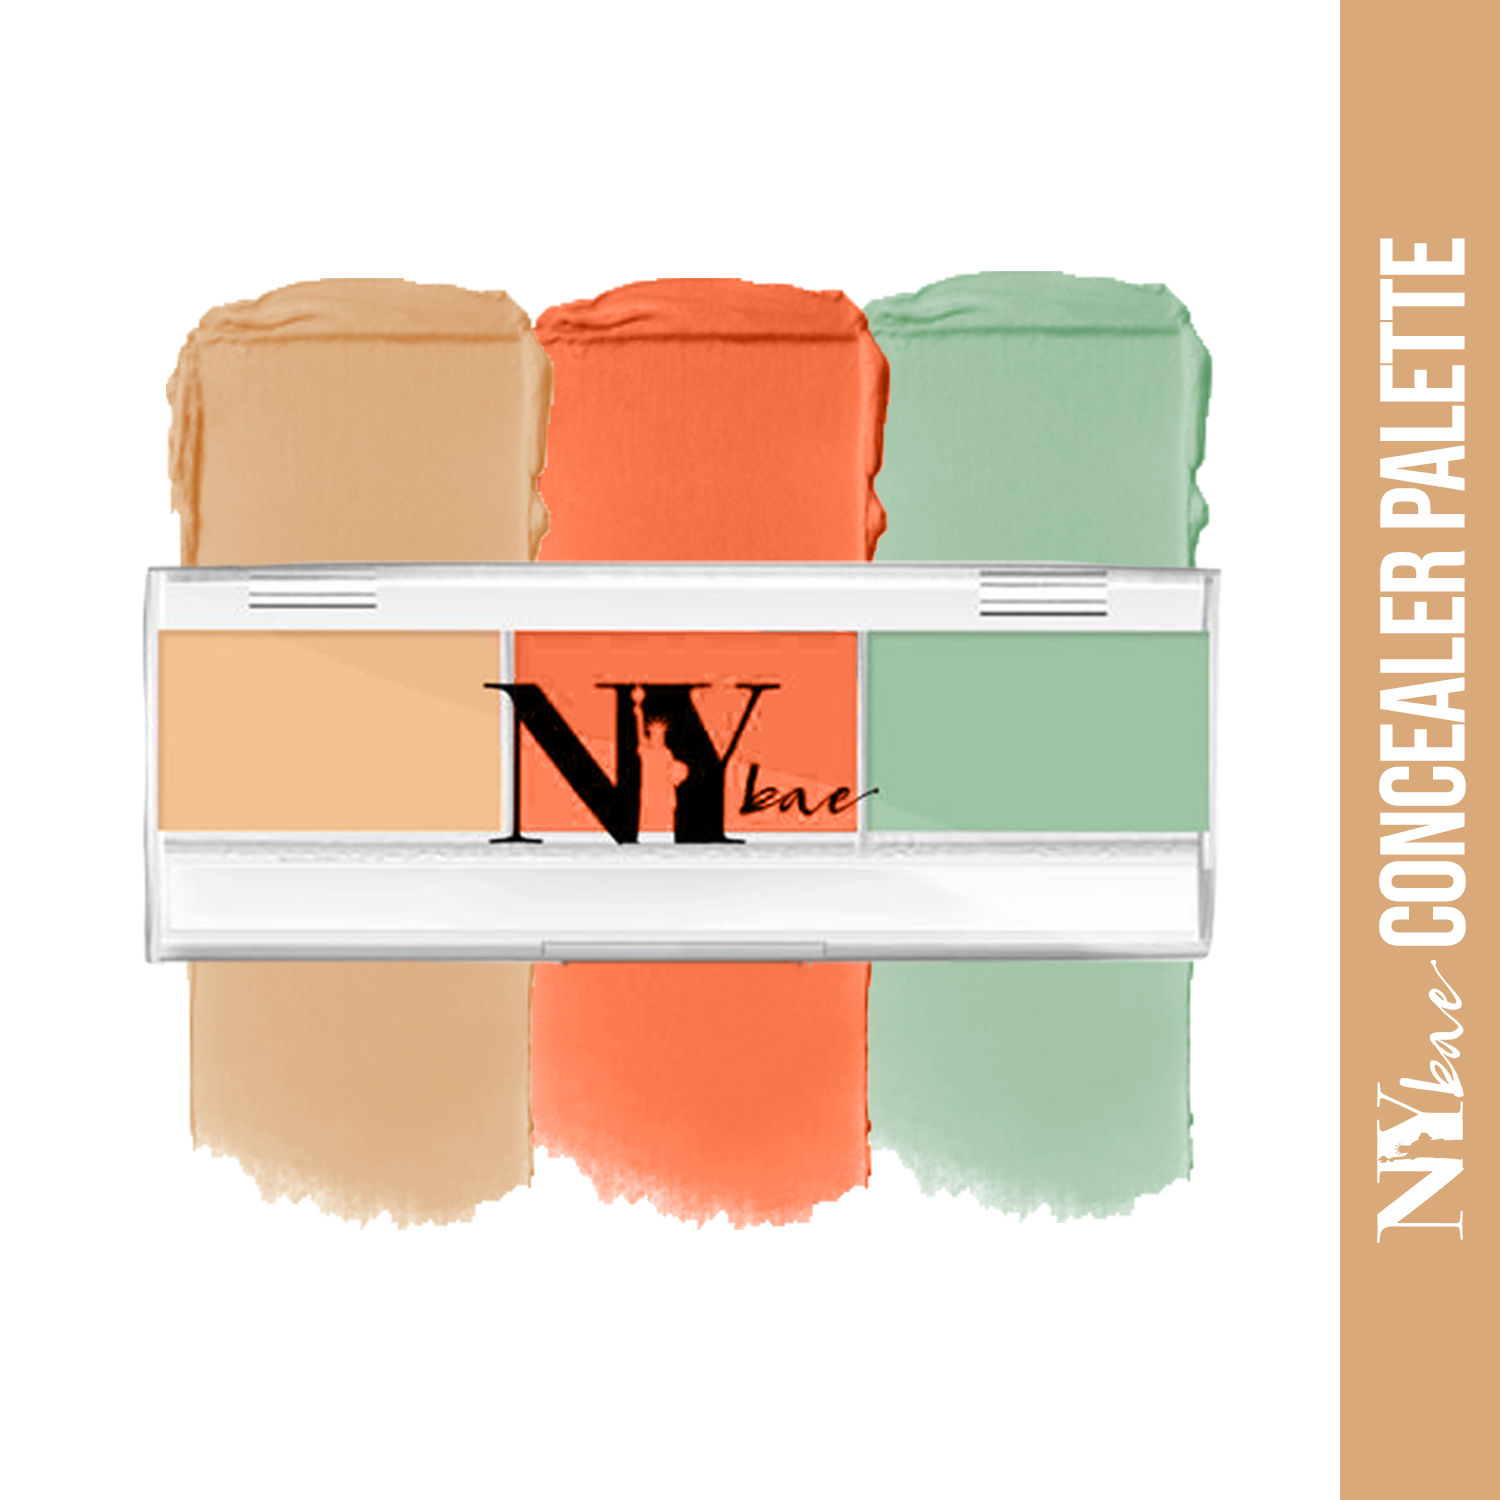 Buy NY Bae Concealer with Orange & Green Color Corrector Palette, For Fair - Wheatish Skin, Maskin' at Manhattan - Champagne at Central Park 2 (1.5 g X 3) - Purplle